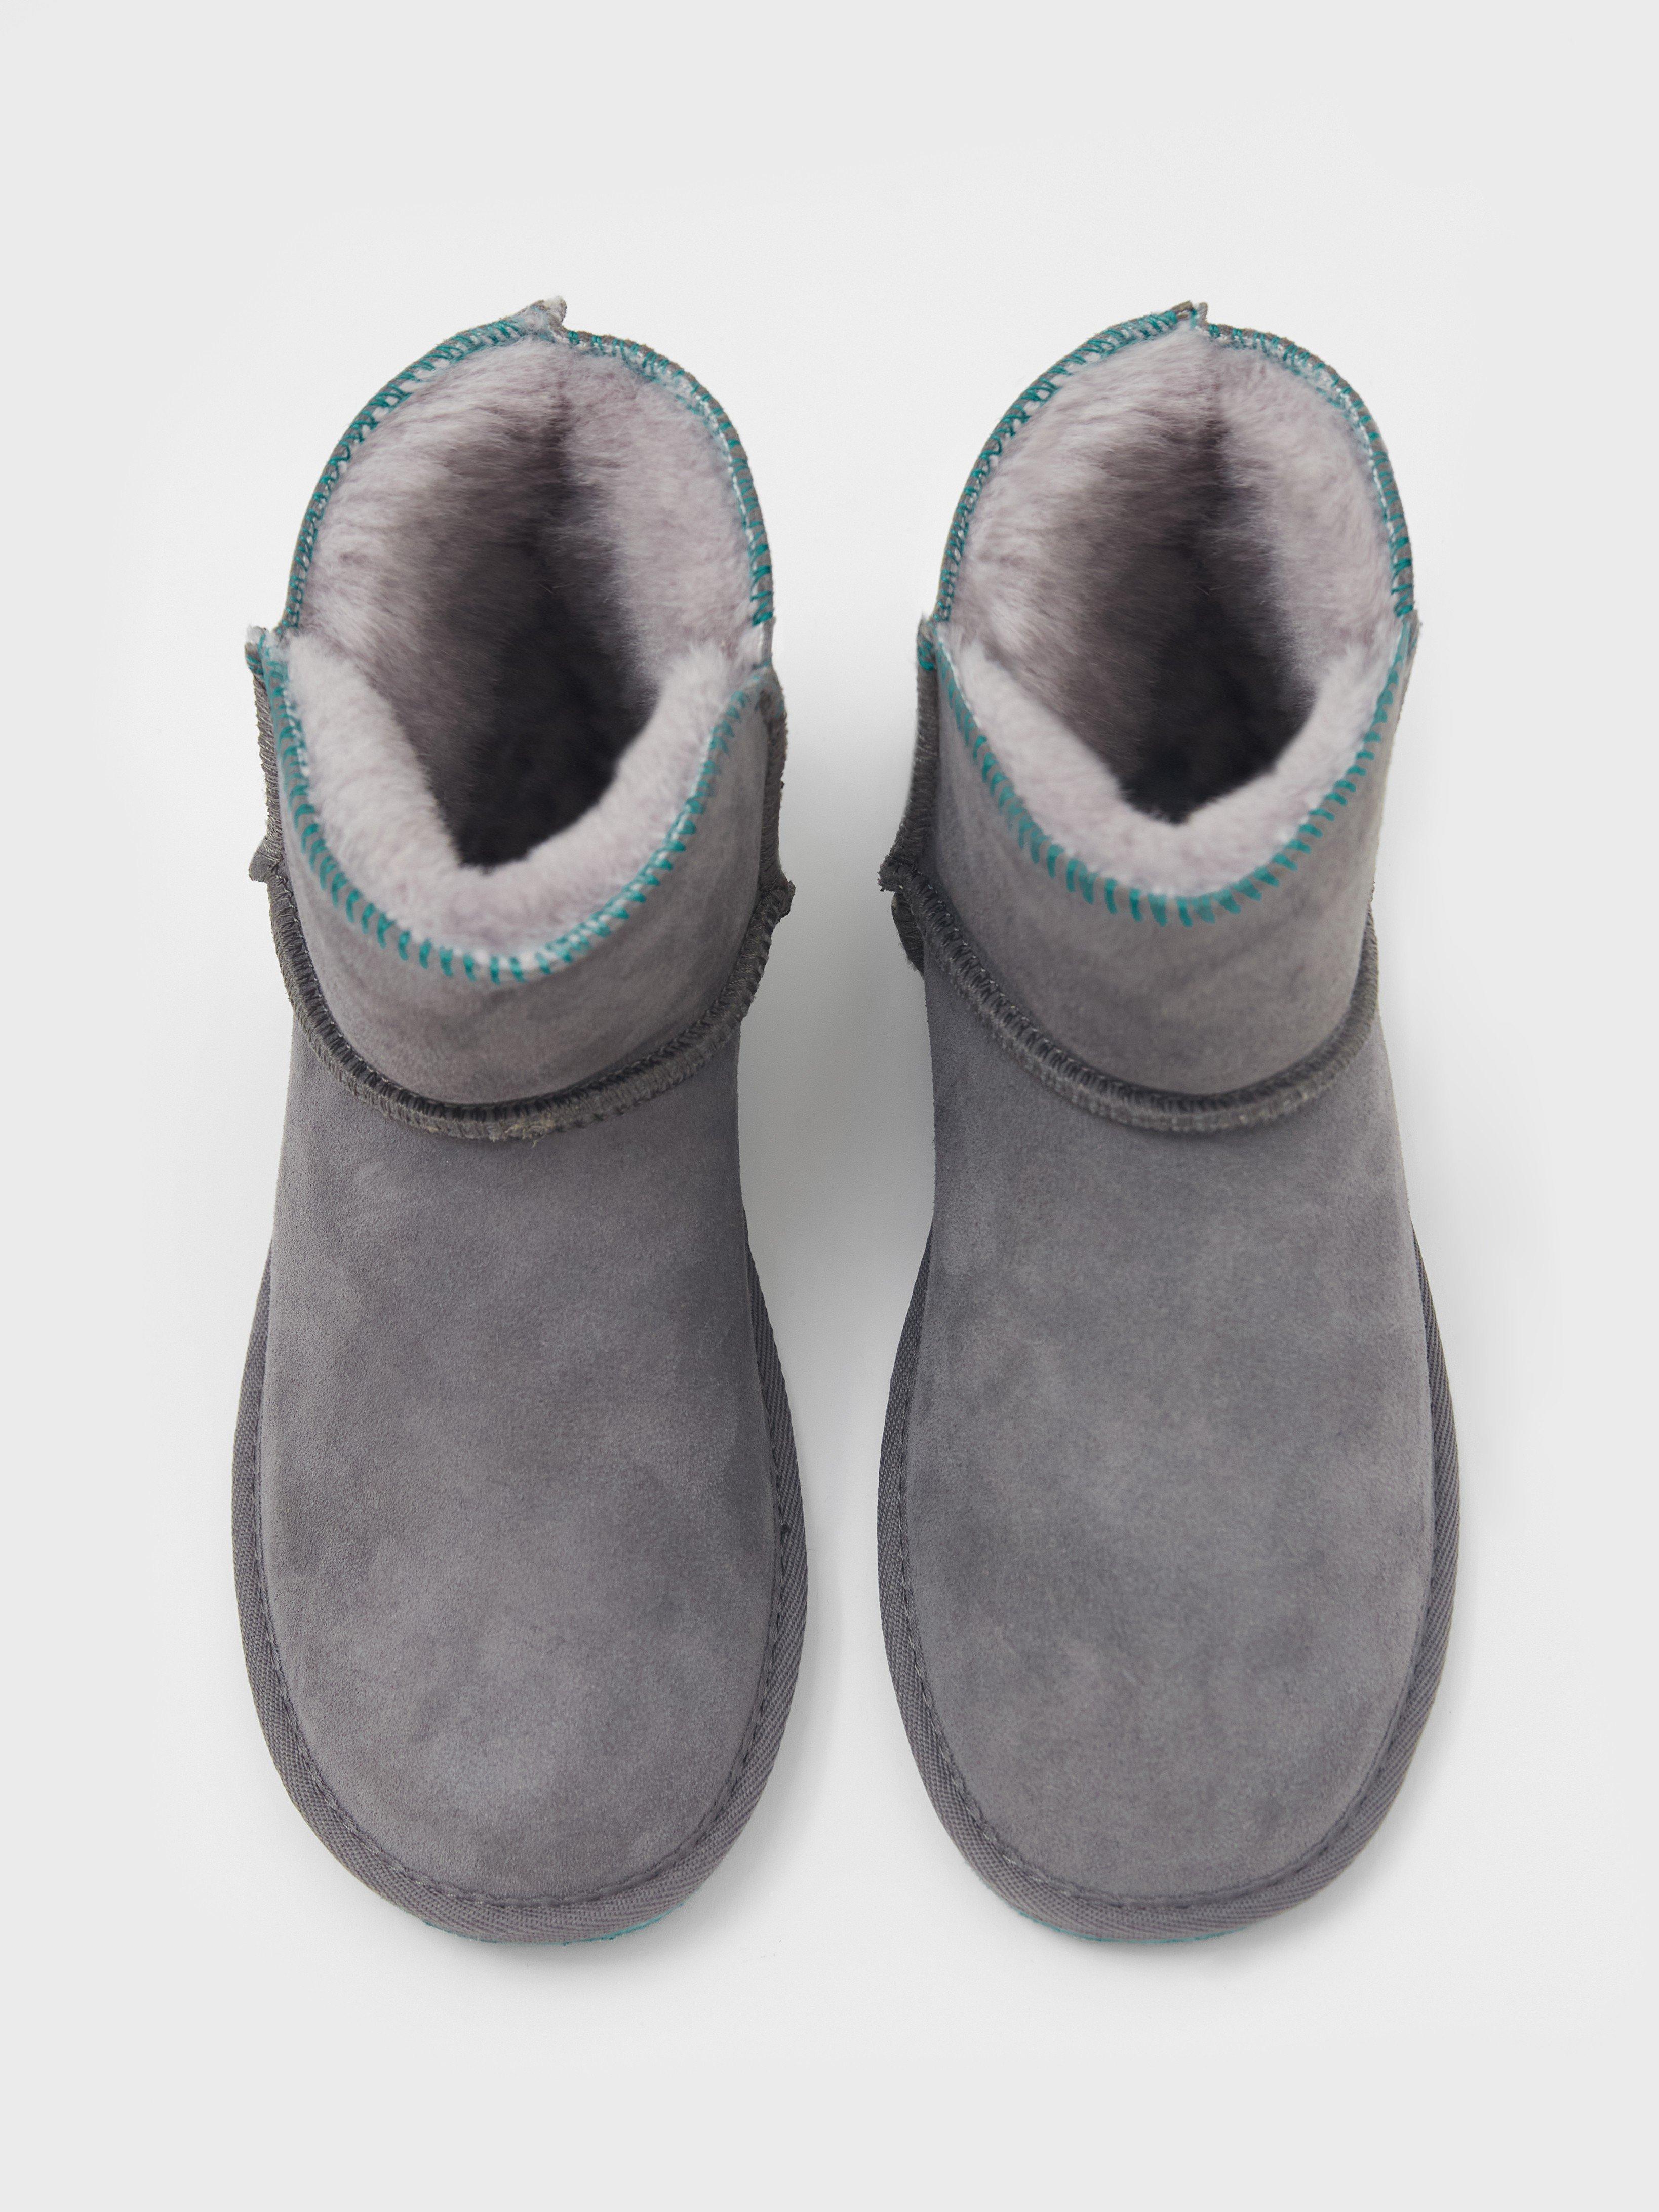 Suede and Shearling Bootie in DK GREY - FLAT DETAIL